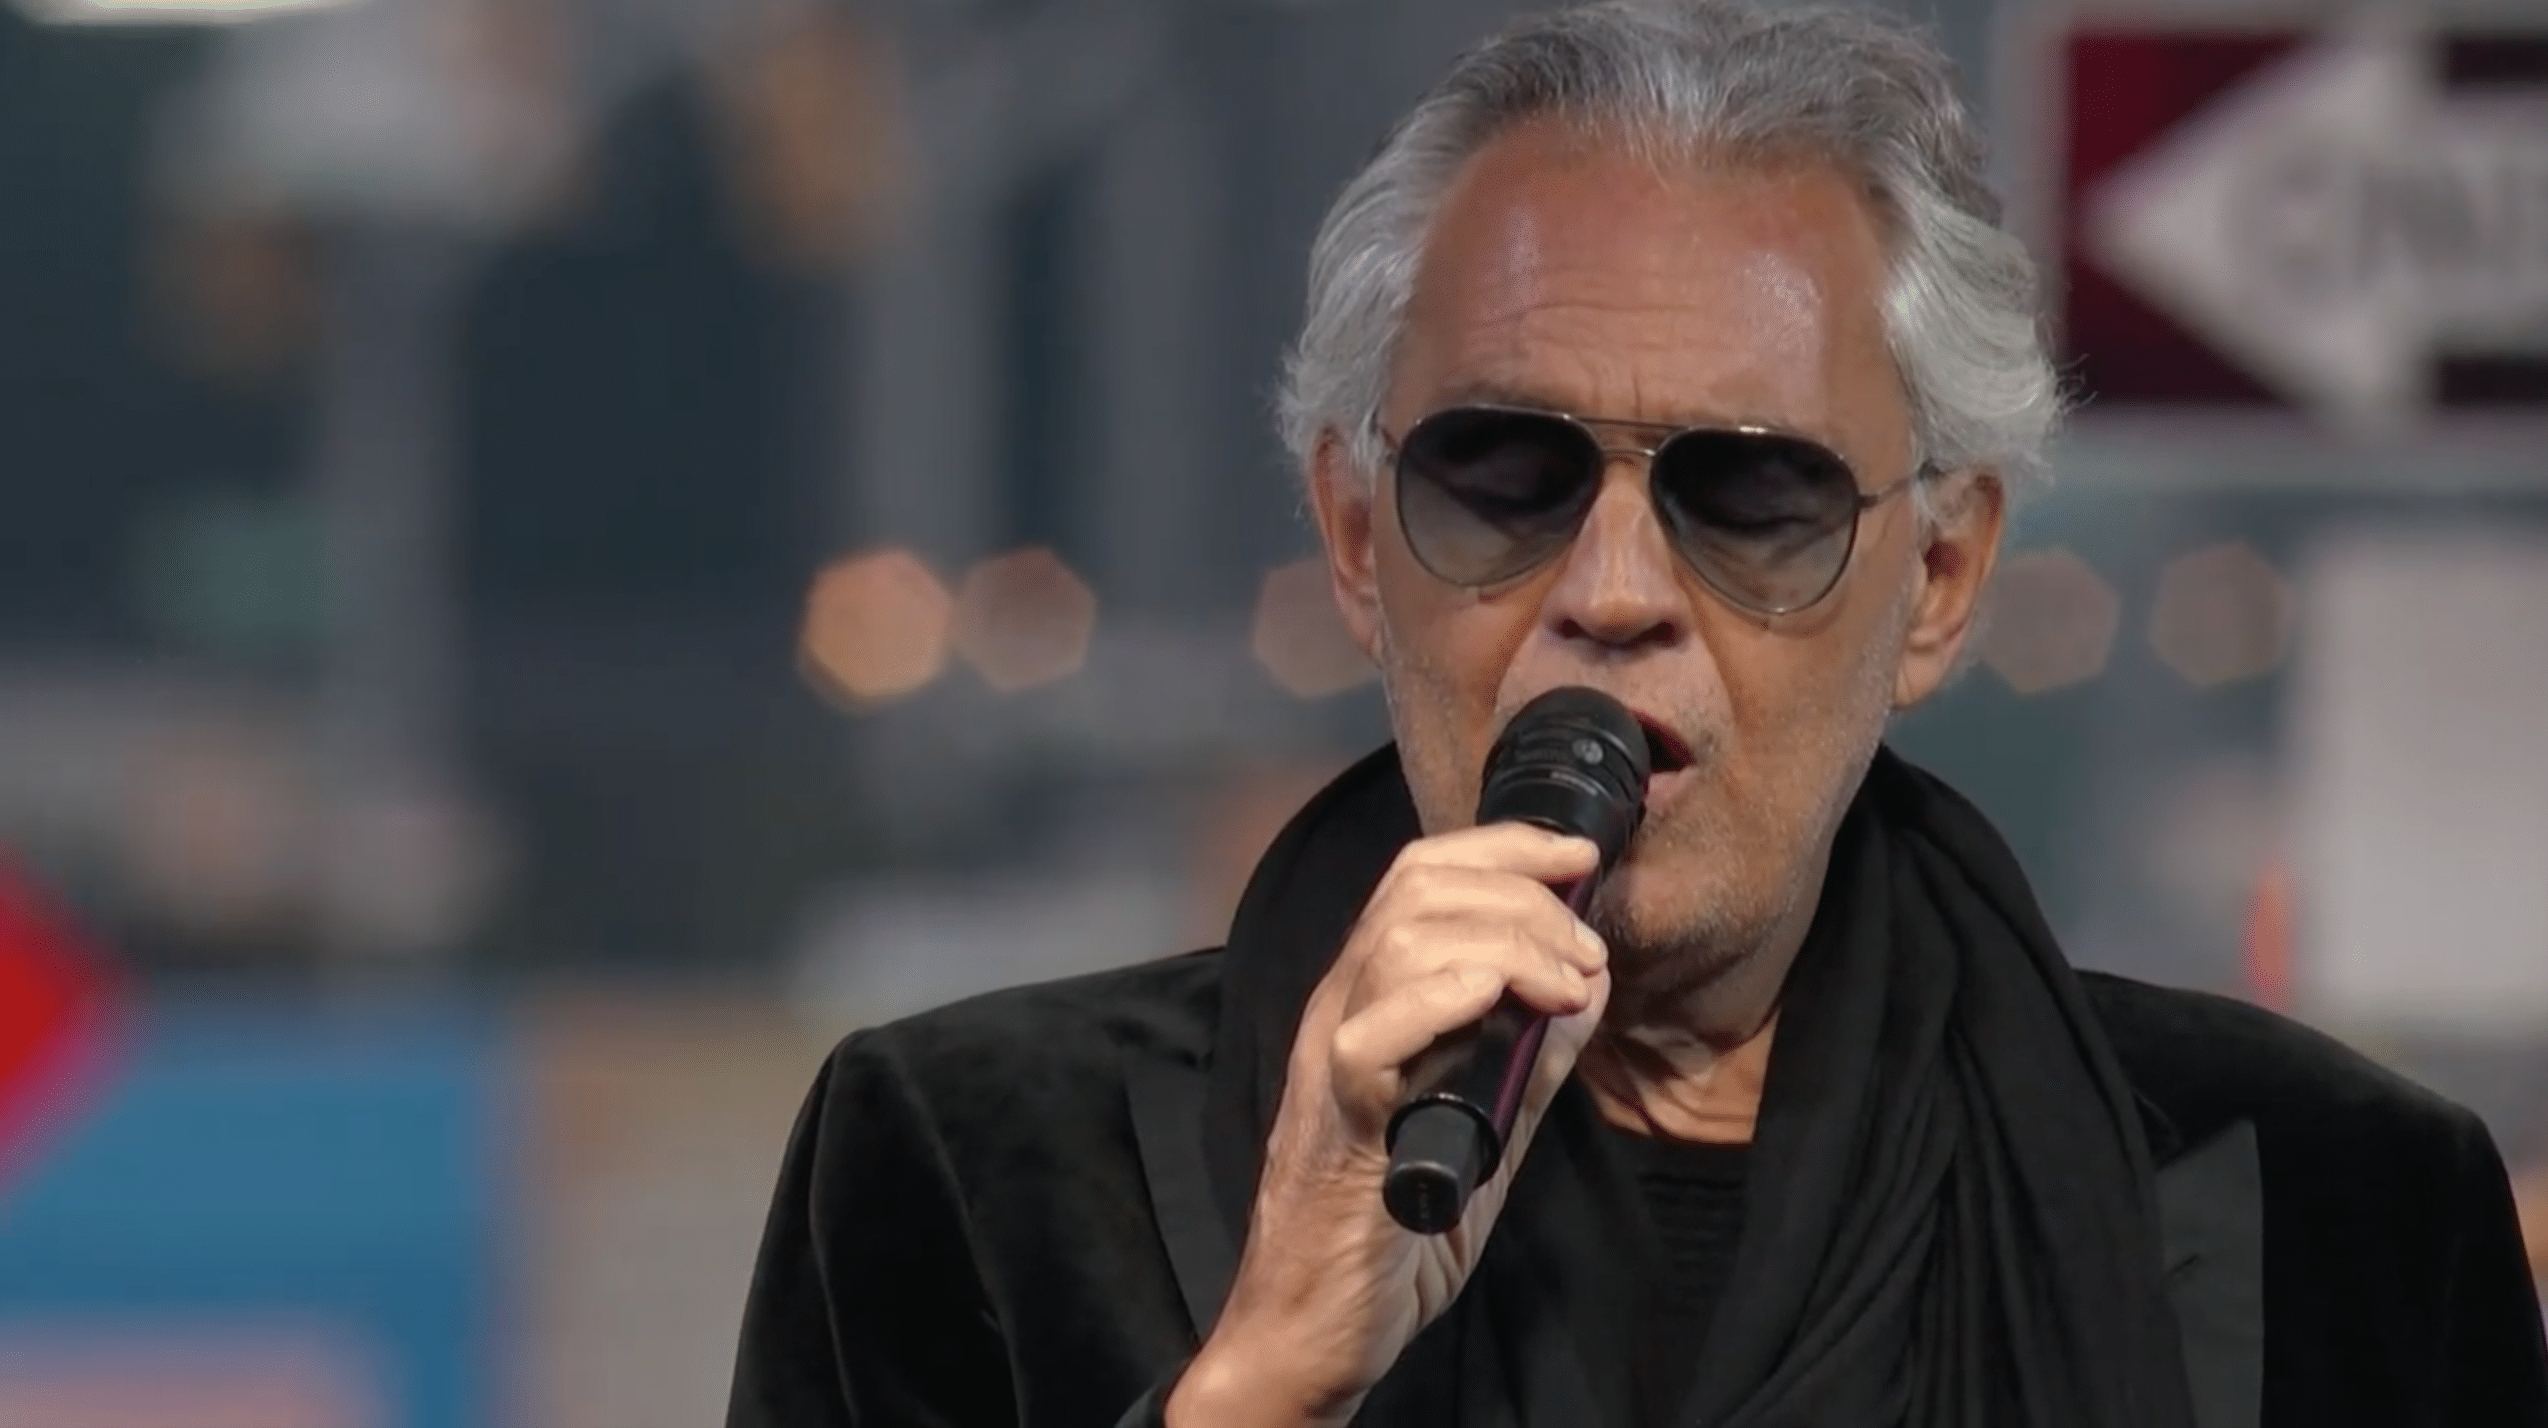 Andrea Bocelli wows fans with 'Amazing Grace' in Times Square